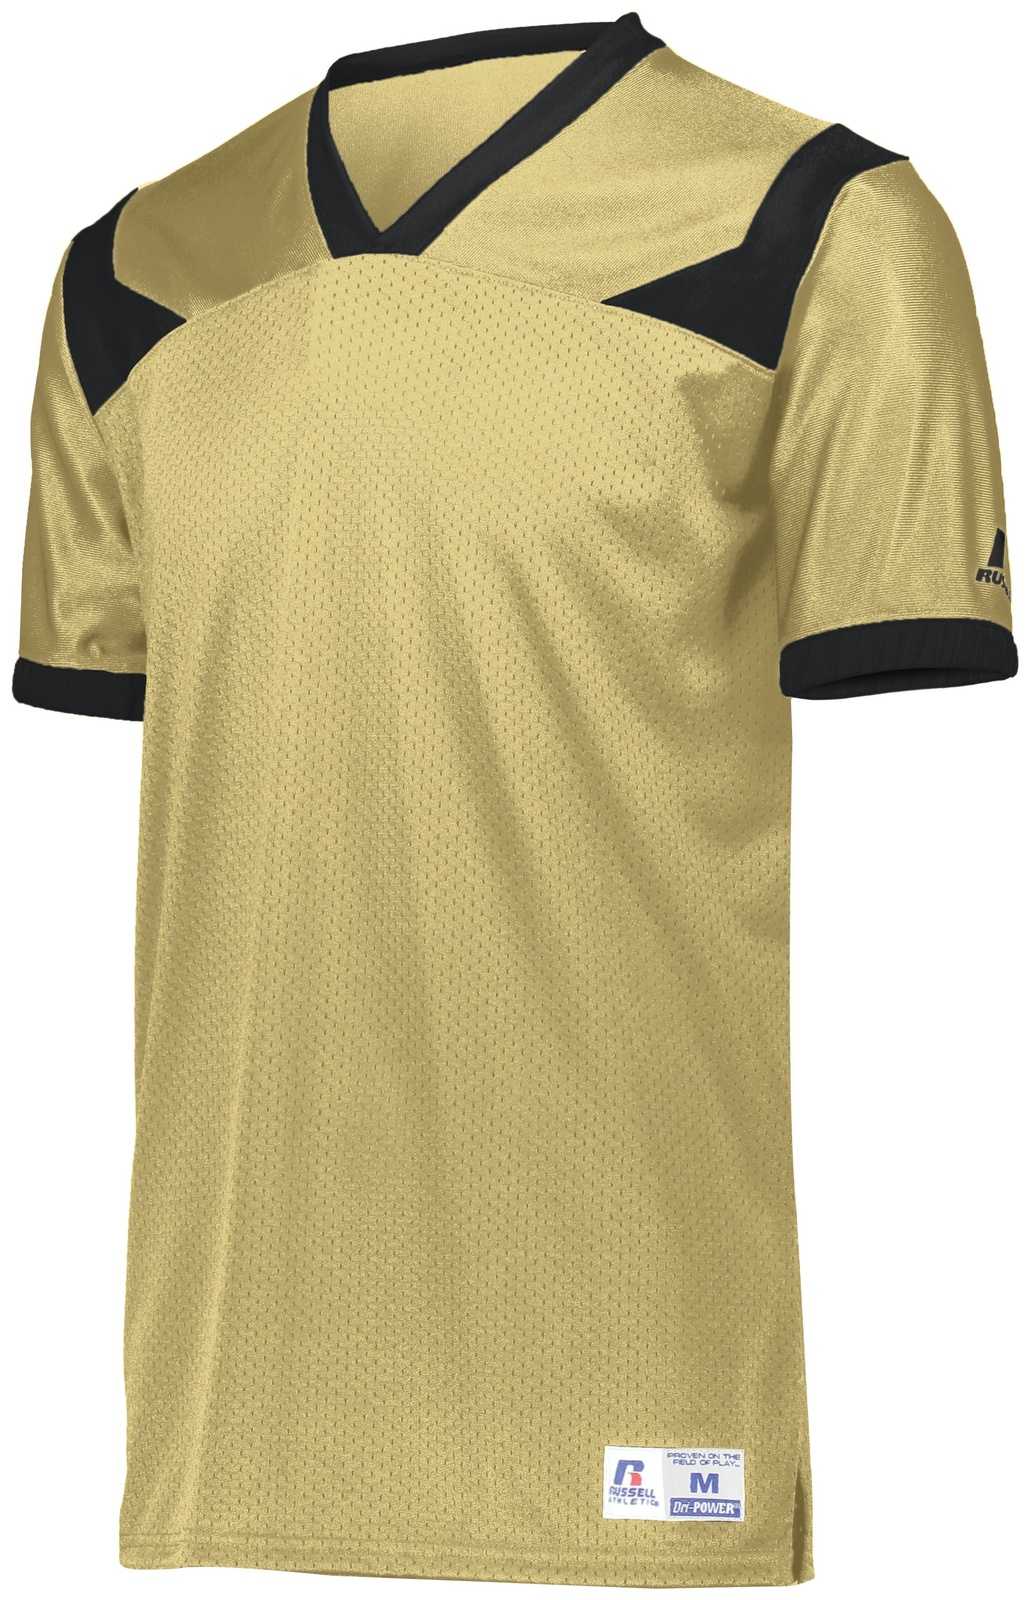 Russell R0493M Phenom6 Flag Football Jersey - Gt Gold Black - HIT a Double